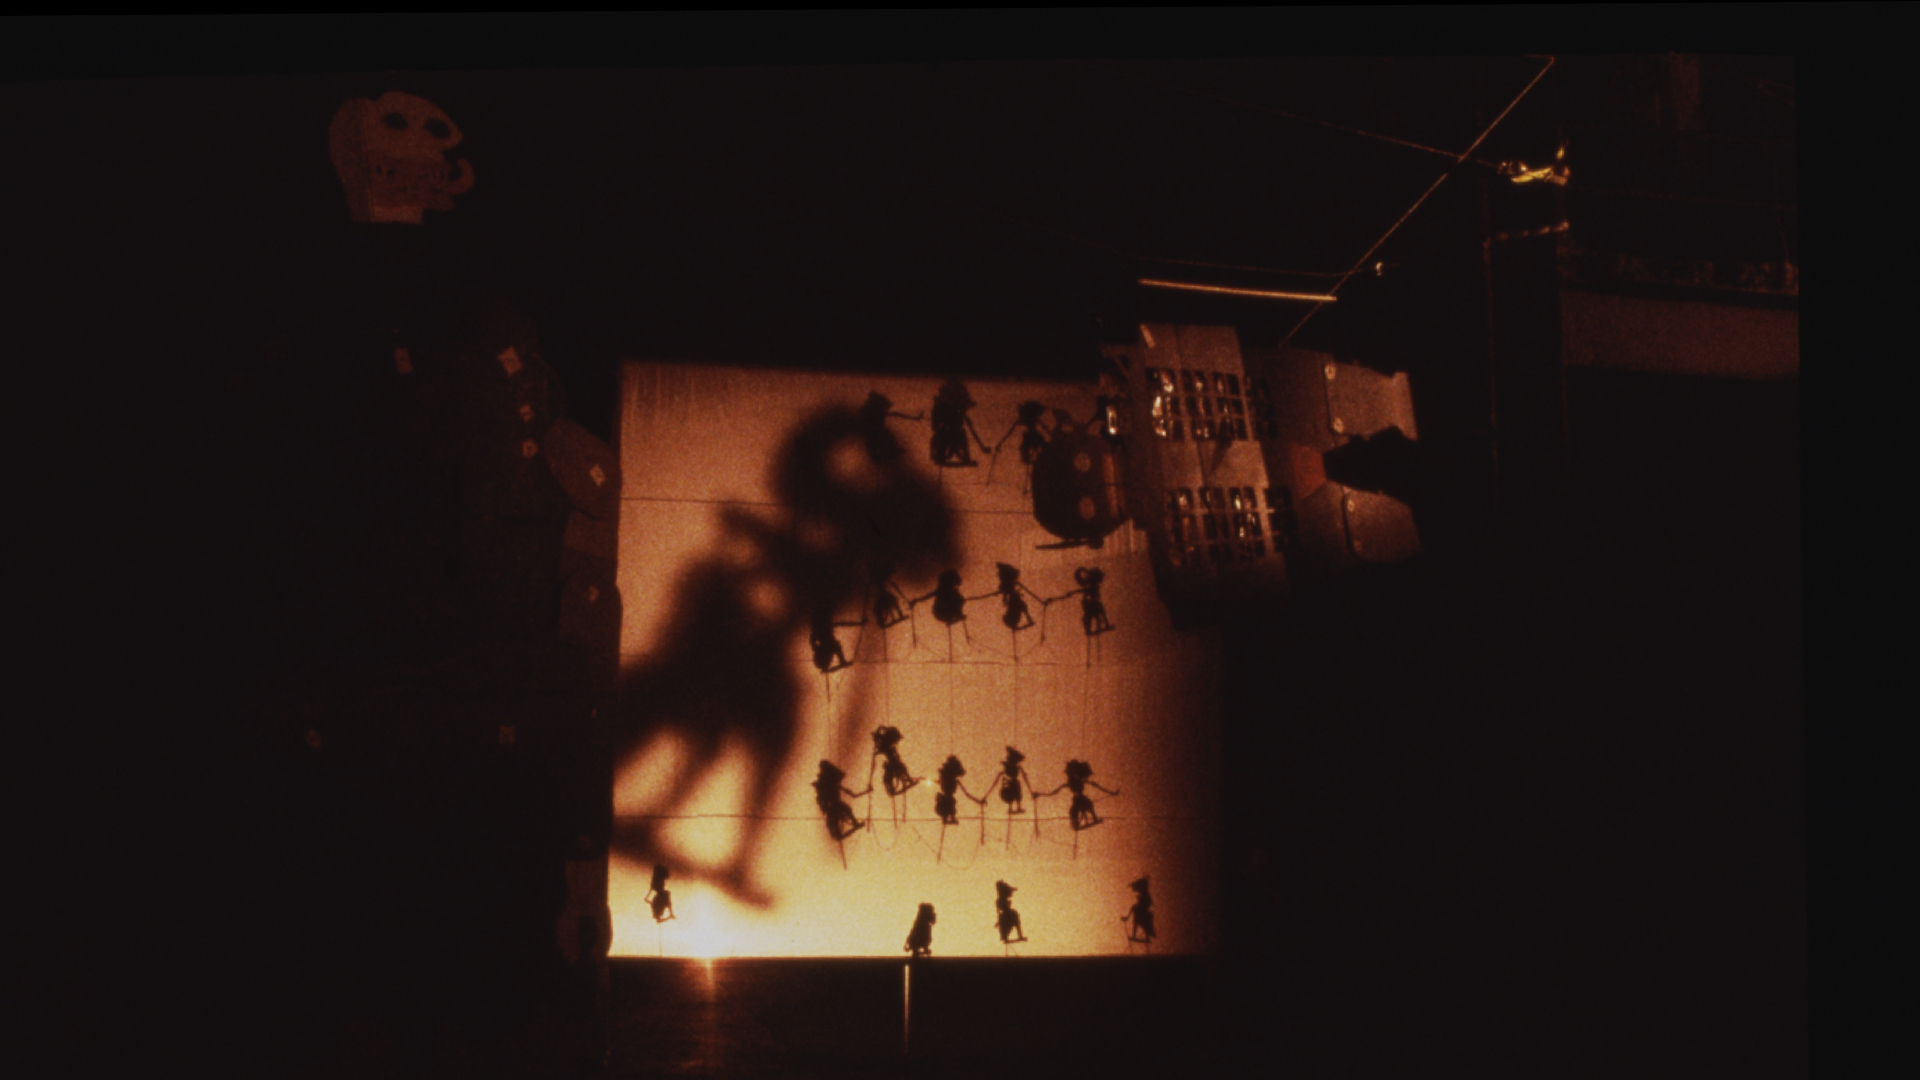 Large-scale transmisi puppets and shadow projections